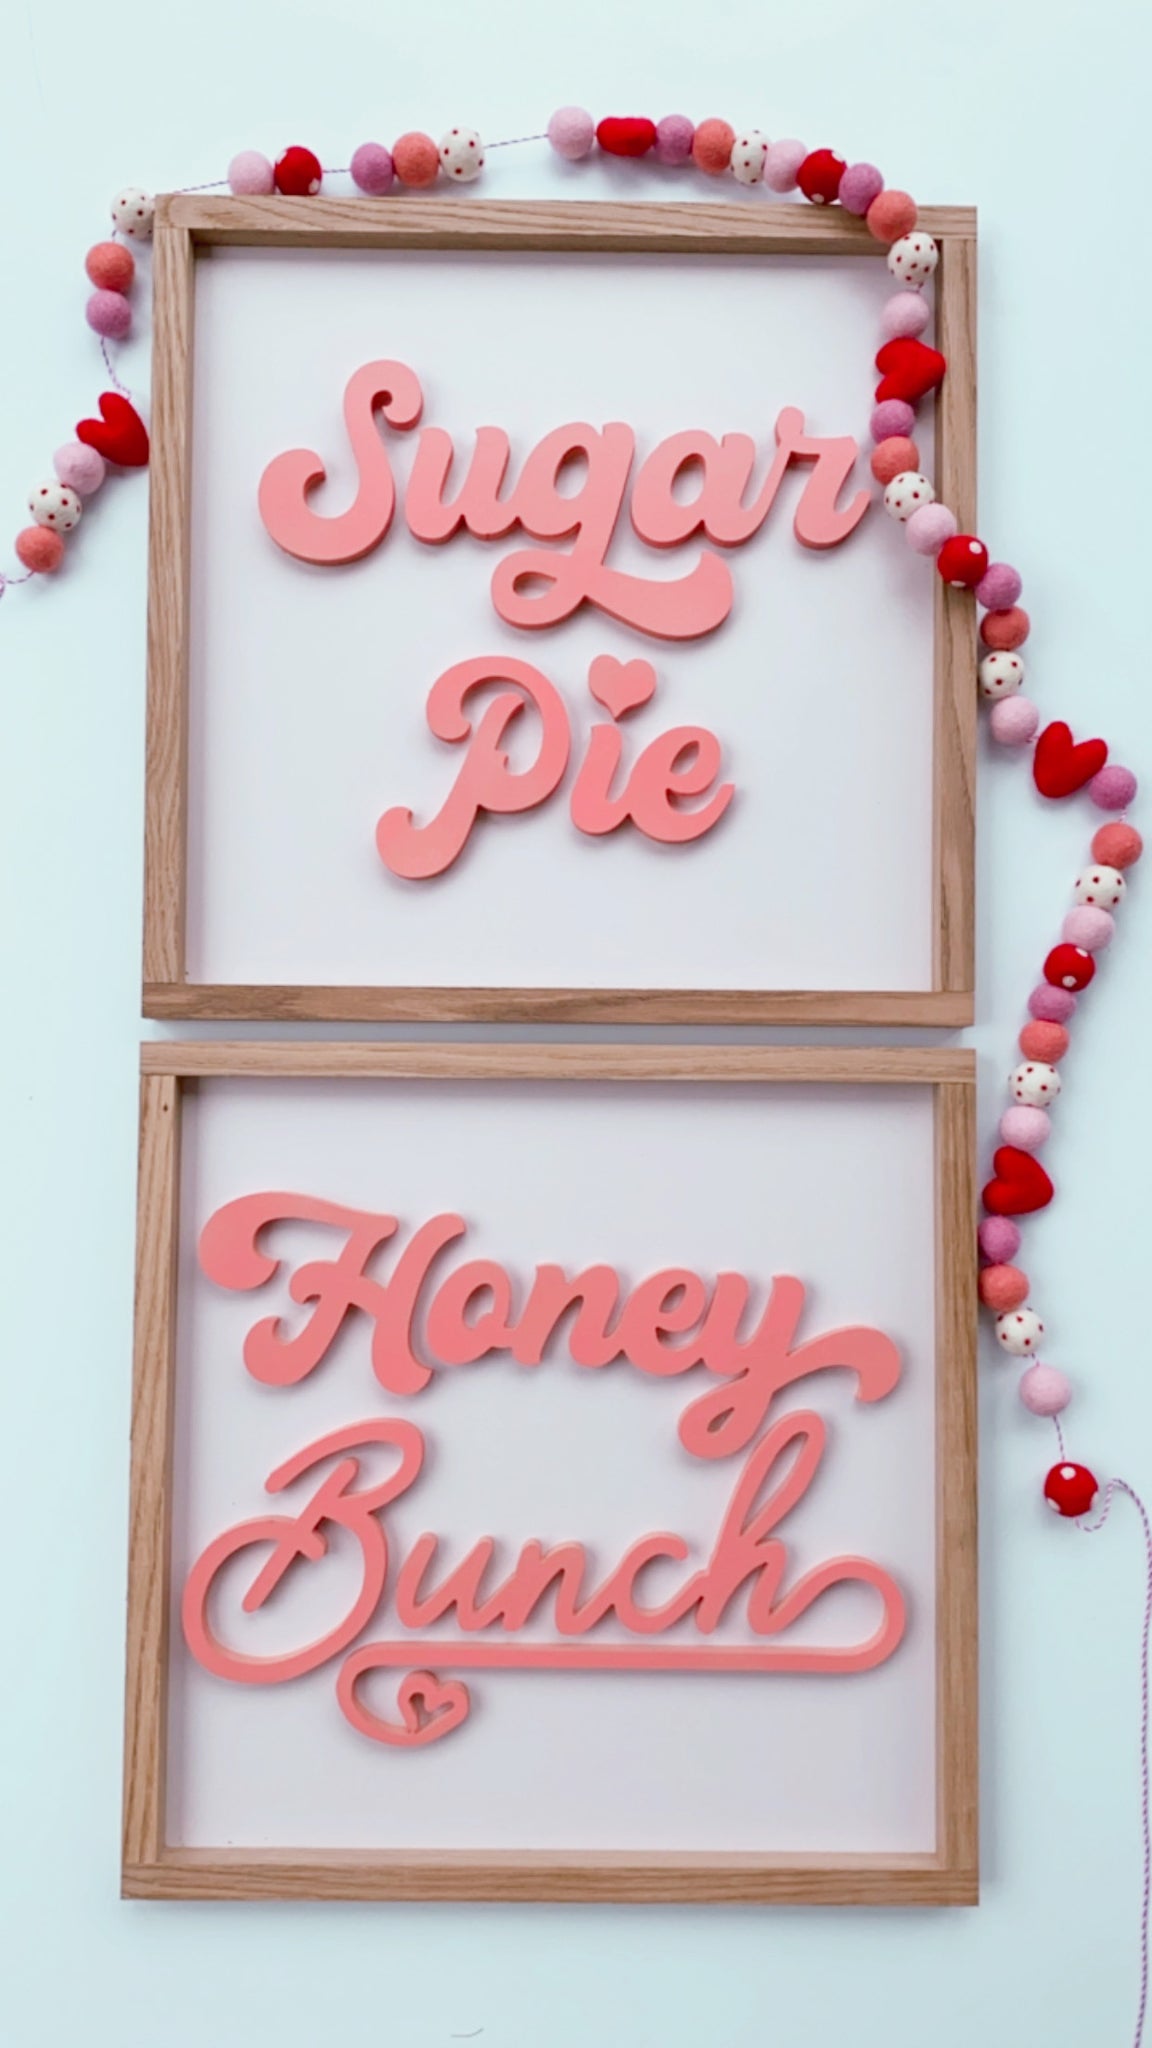 Sugar Pie - Peach ( Honey Bunch sold separately) – Opal+Olive